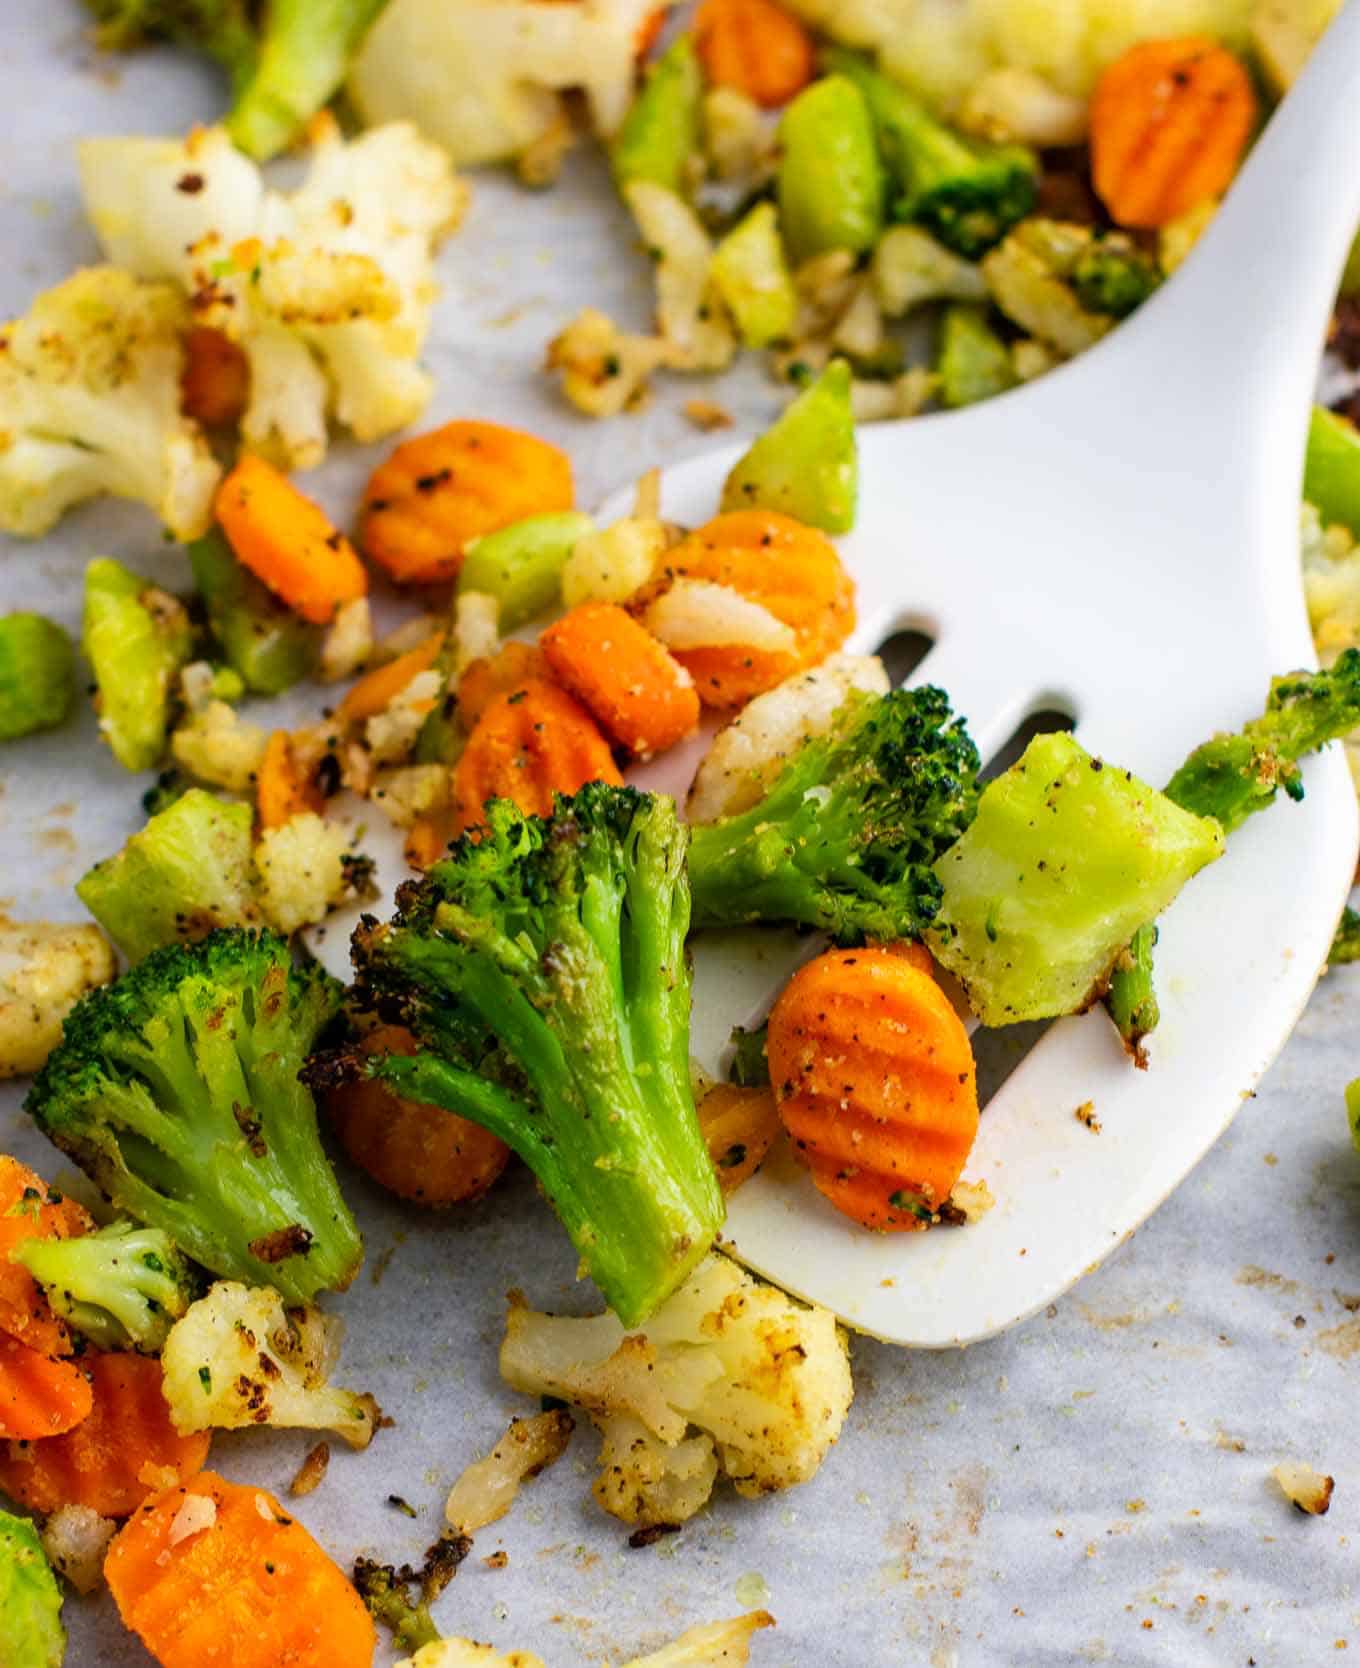 How to roast frozen vegetables – these are amazing and so easy to make! #frozenvegetables #roastedvegetables #sidedish #vegan #vegetables #vegetarian